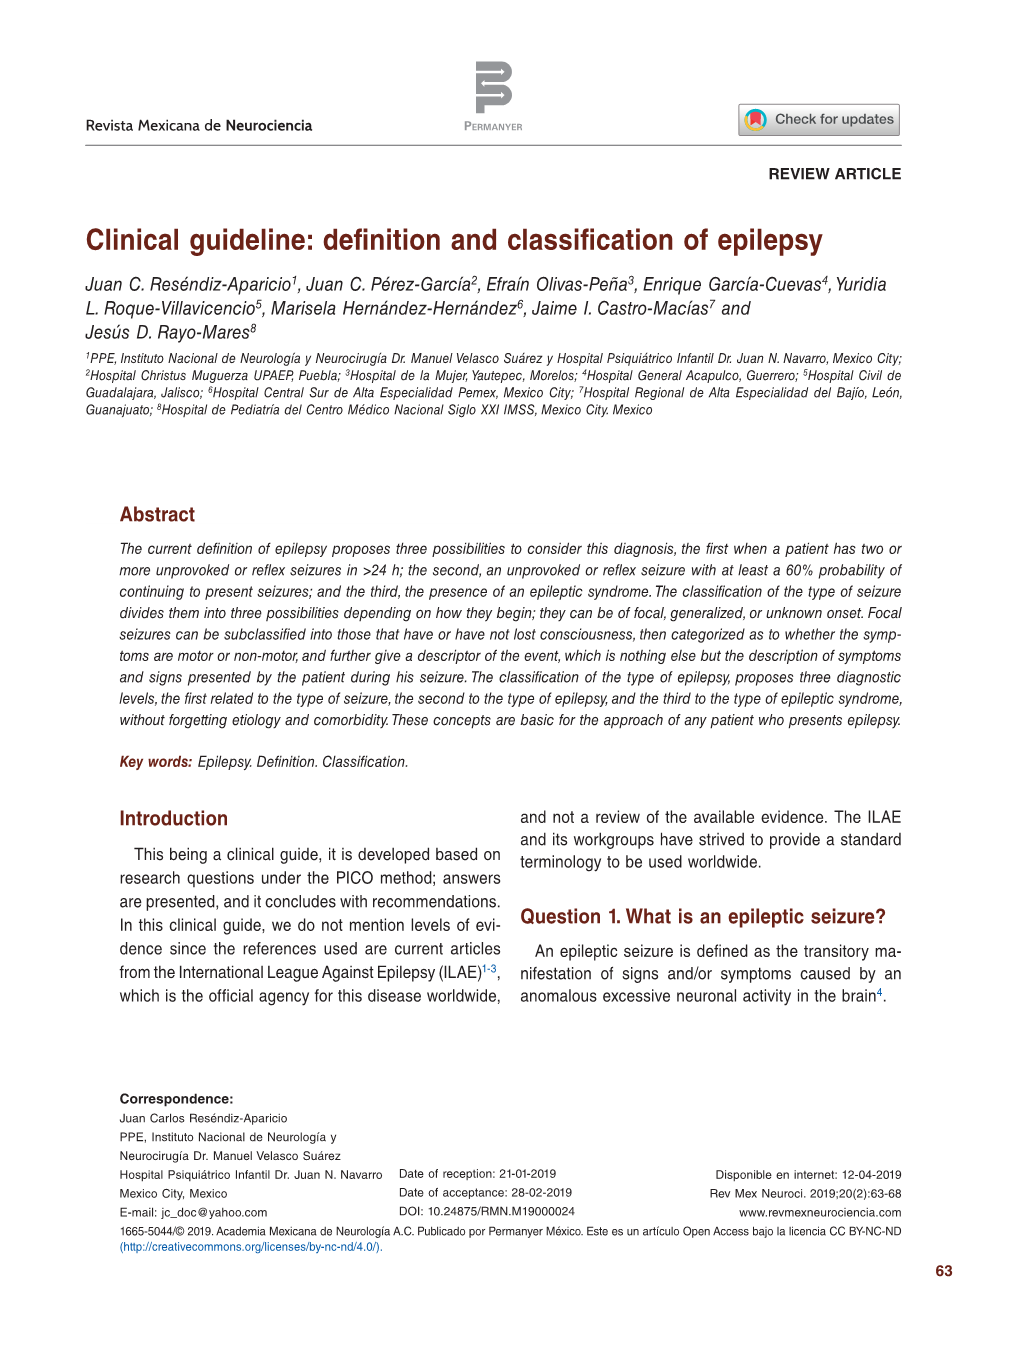 Clinical Guideline: Definition and Classification of Epilepsy